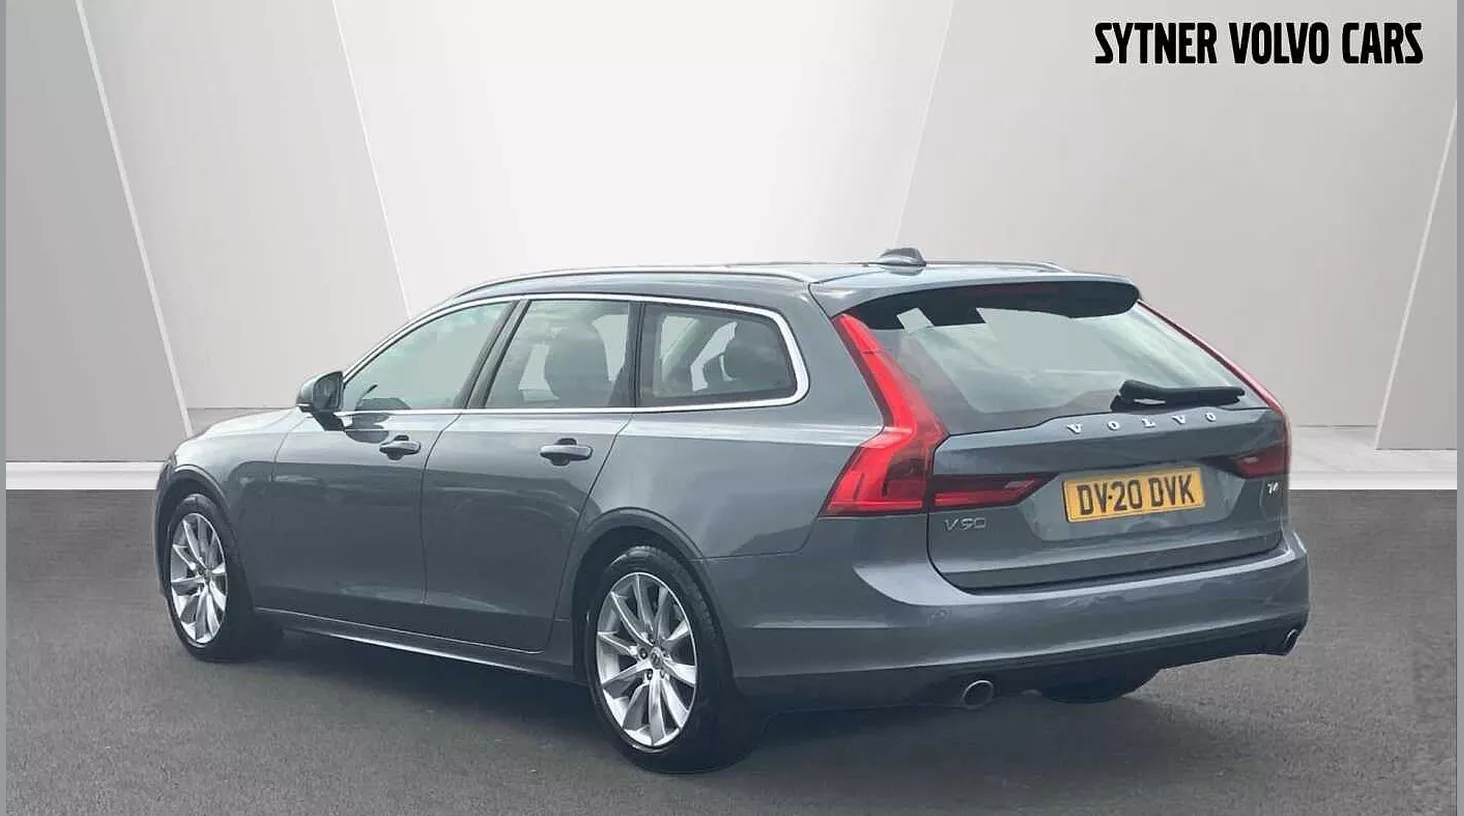 Volvo V90 2.0 T4 Momentum Plus 5dr Geartronic